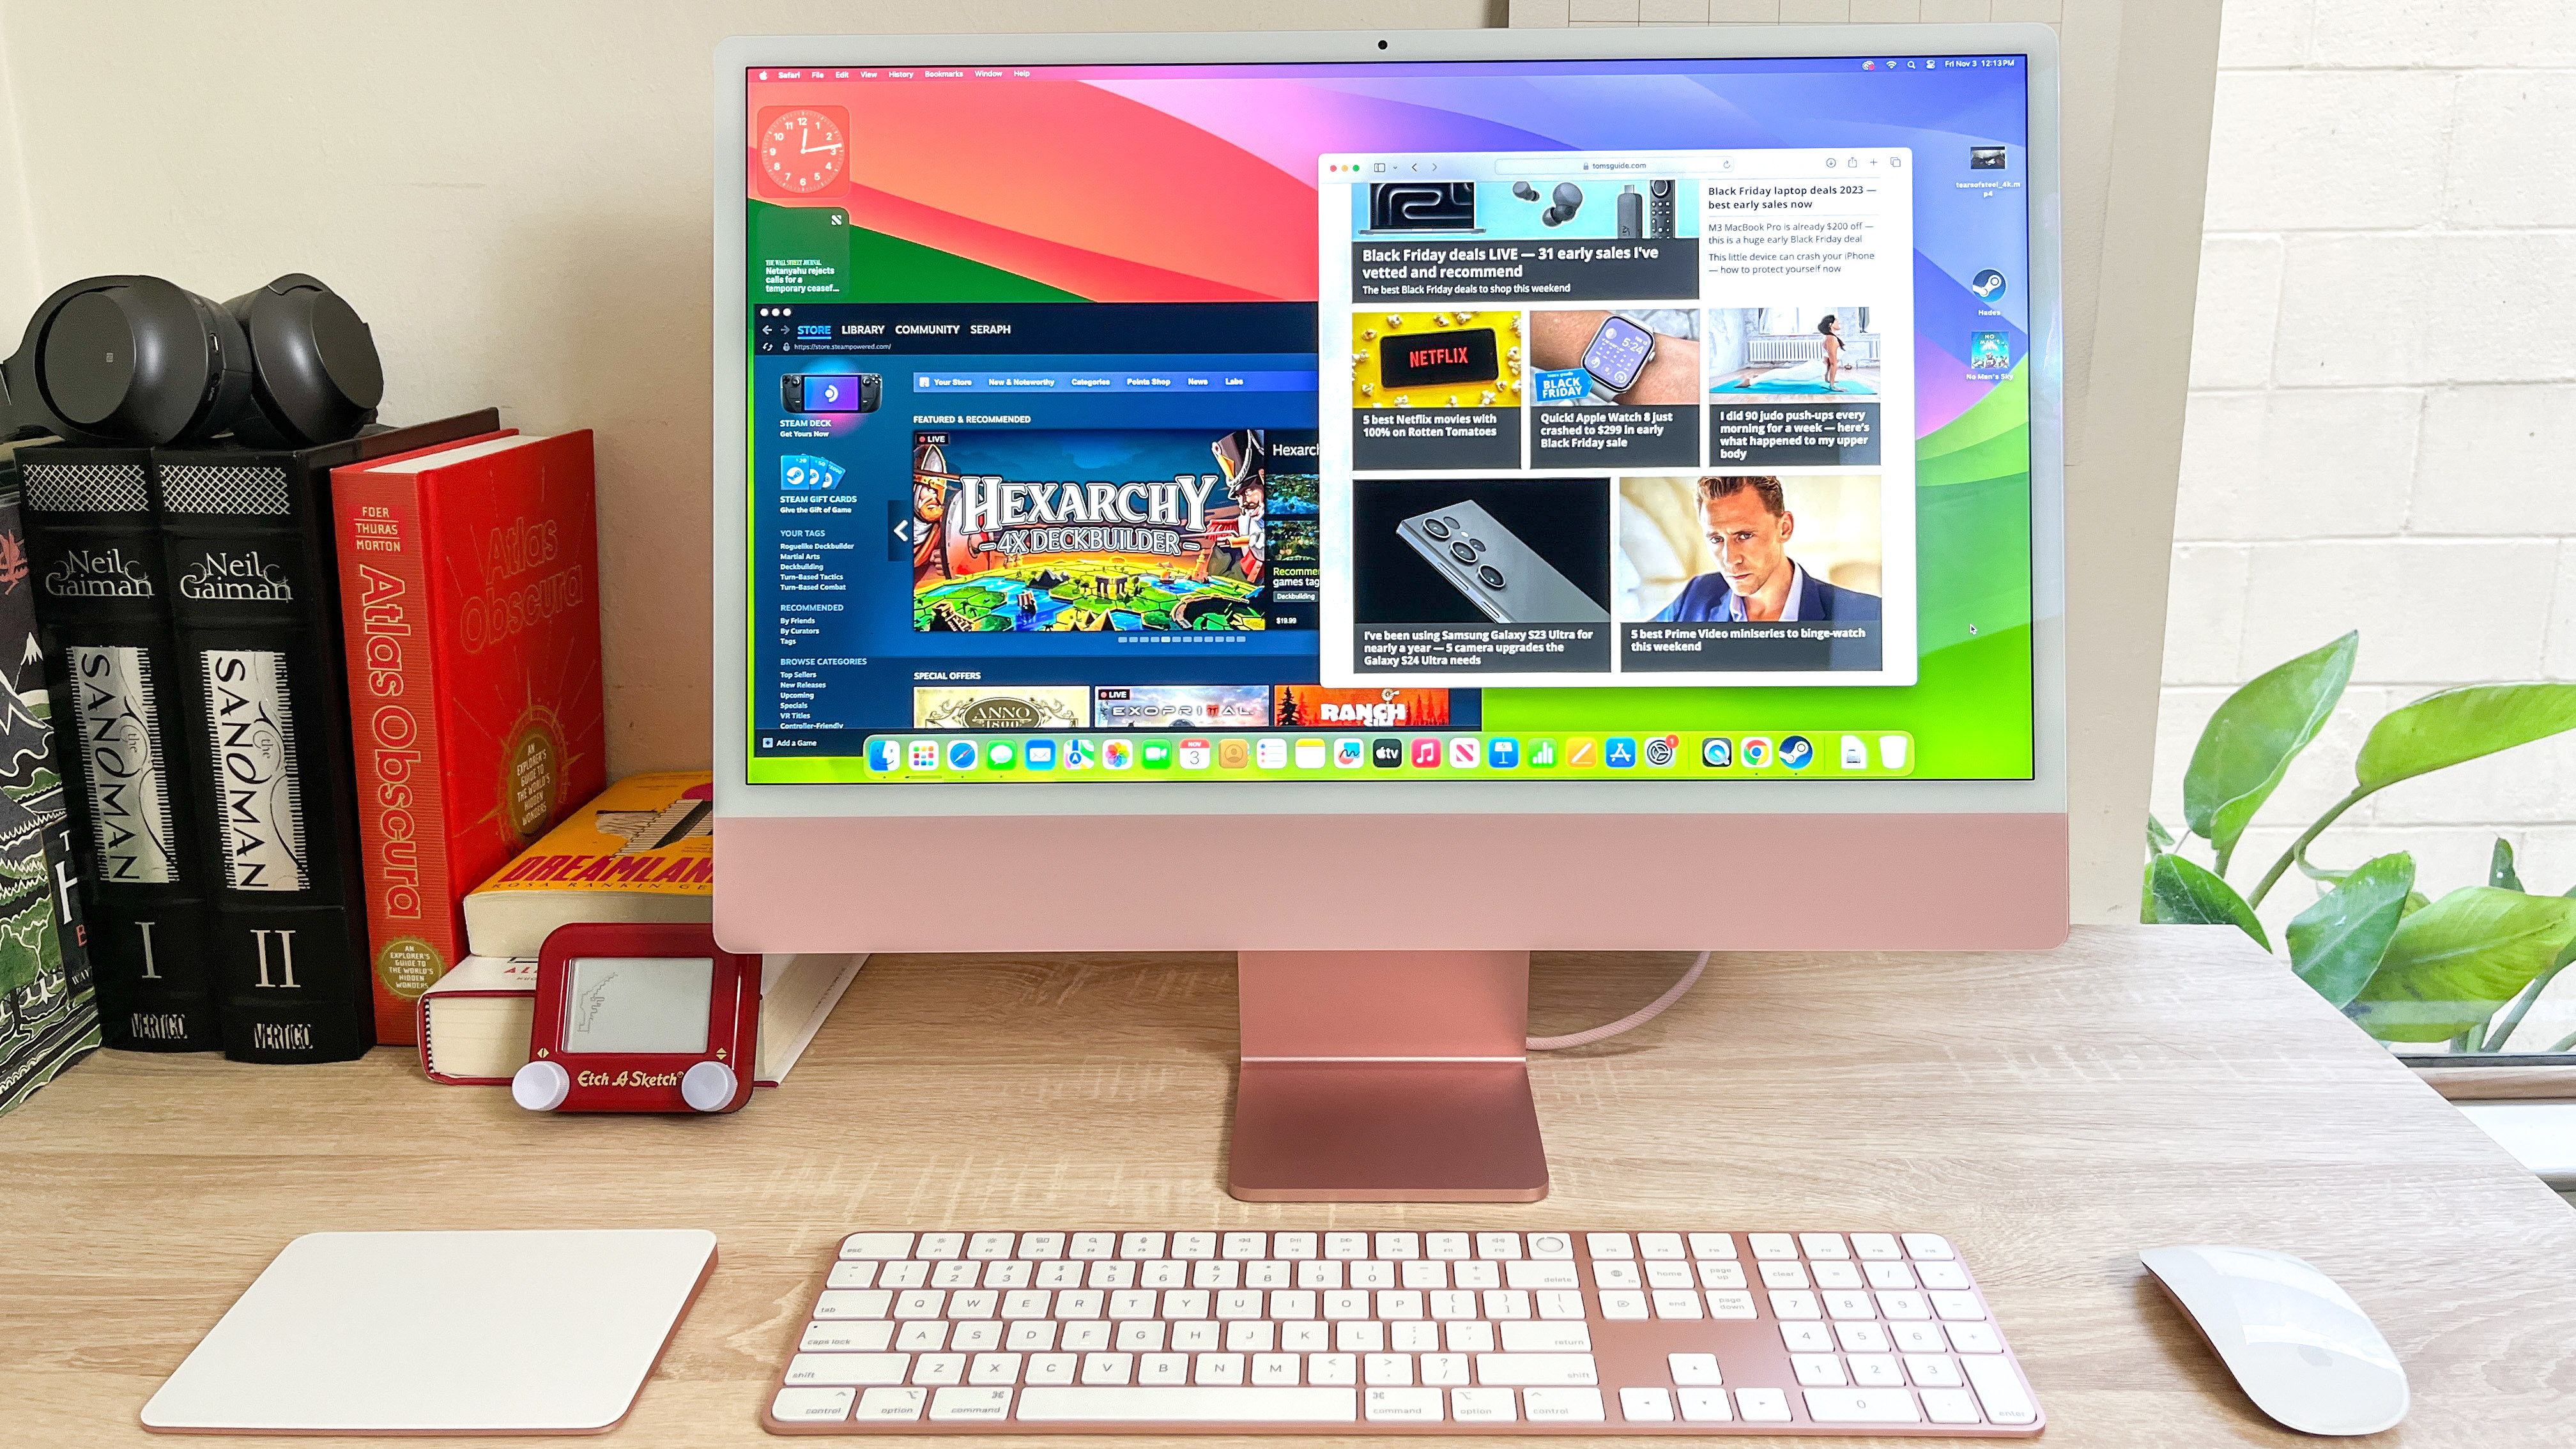 iMac (M1, 2021) Review: The Future Looks Bright